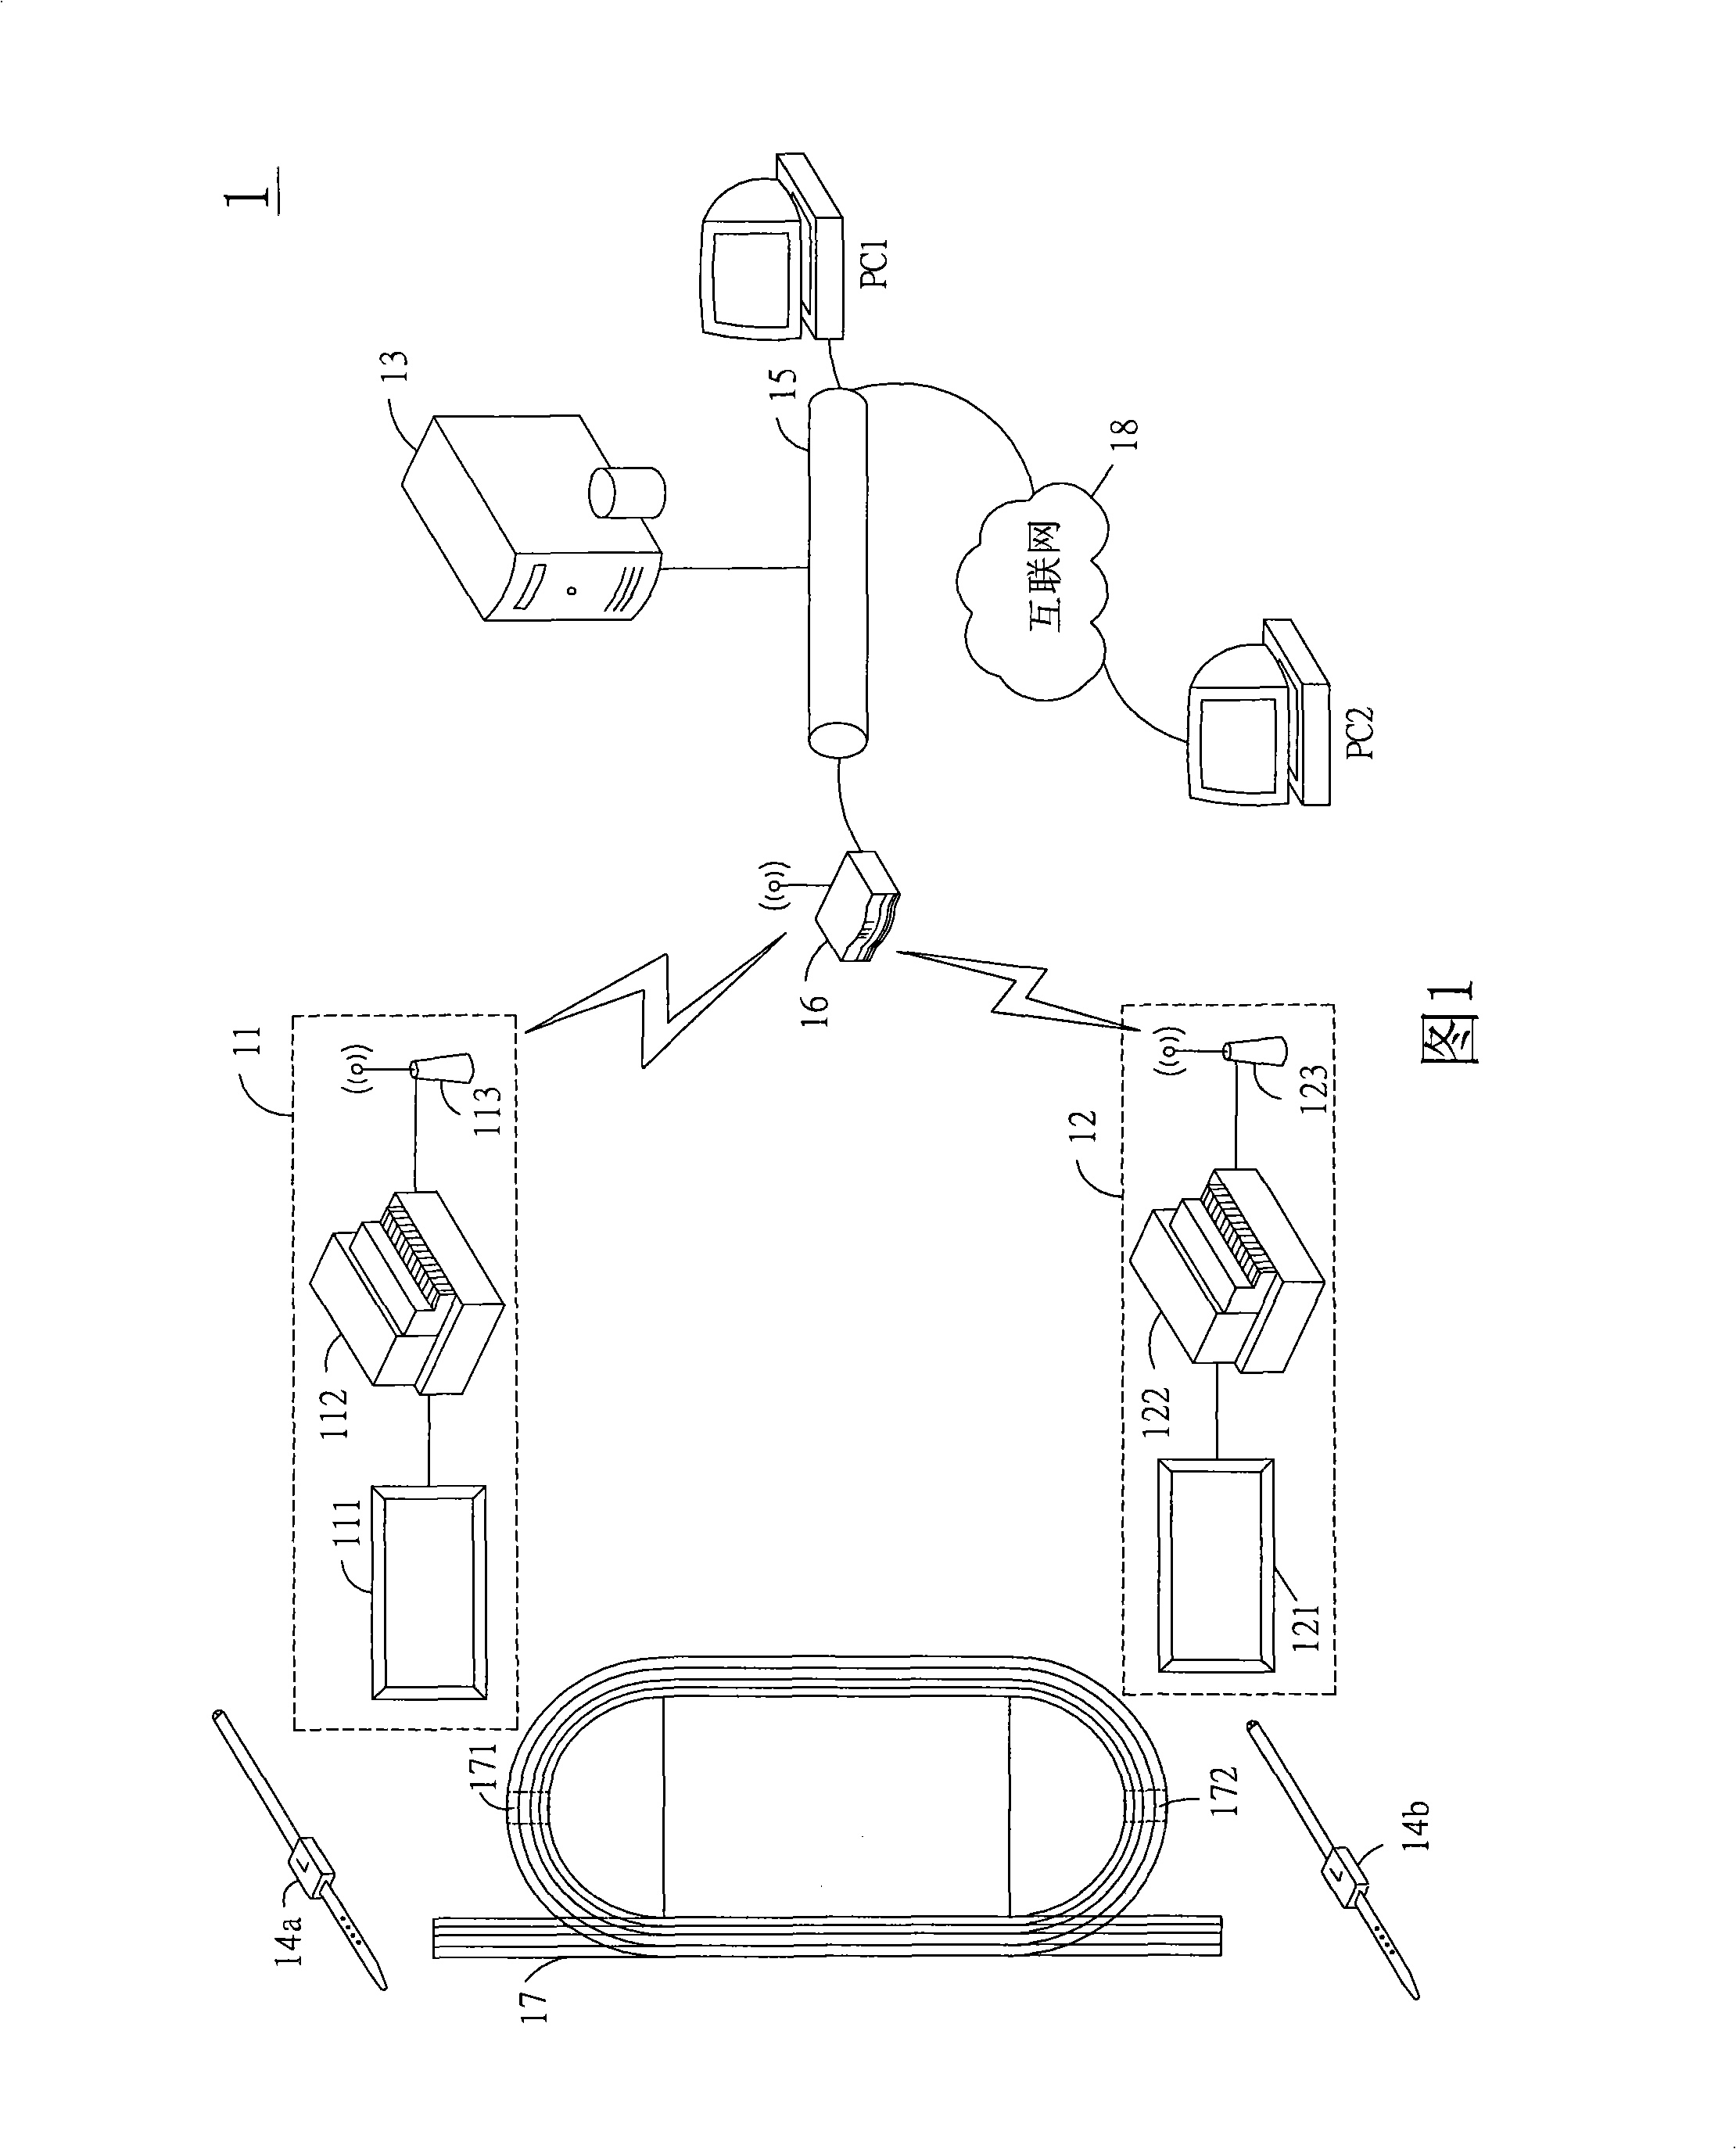 Movement management system using wireless radio frequency recognition